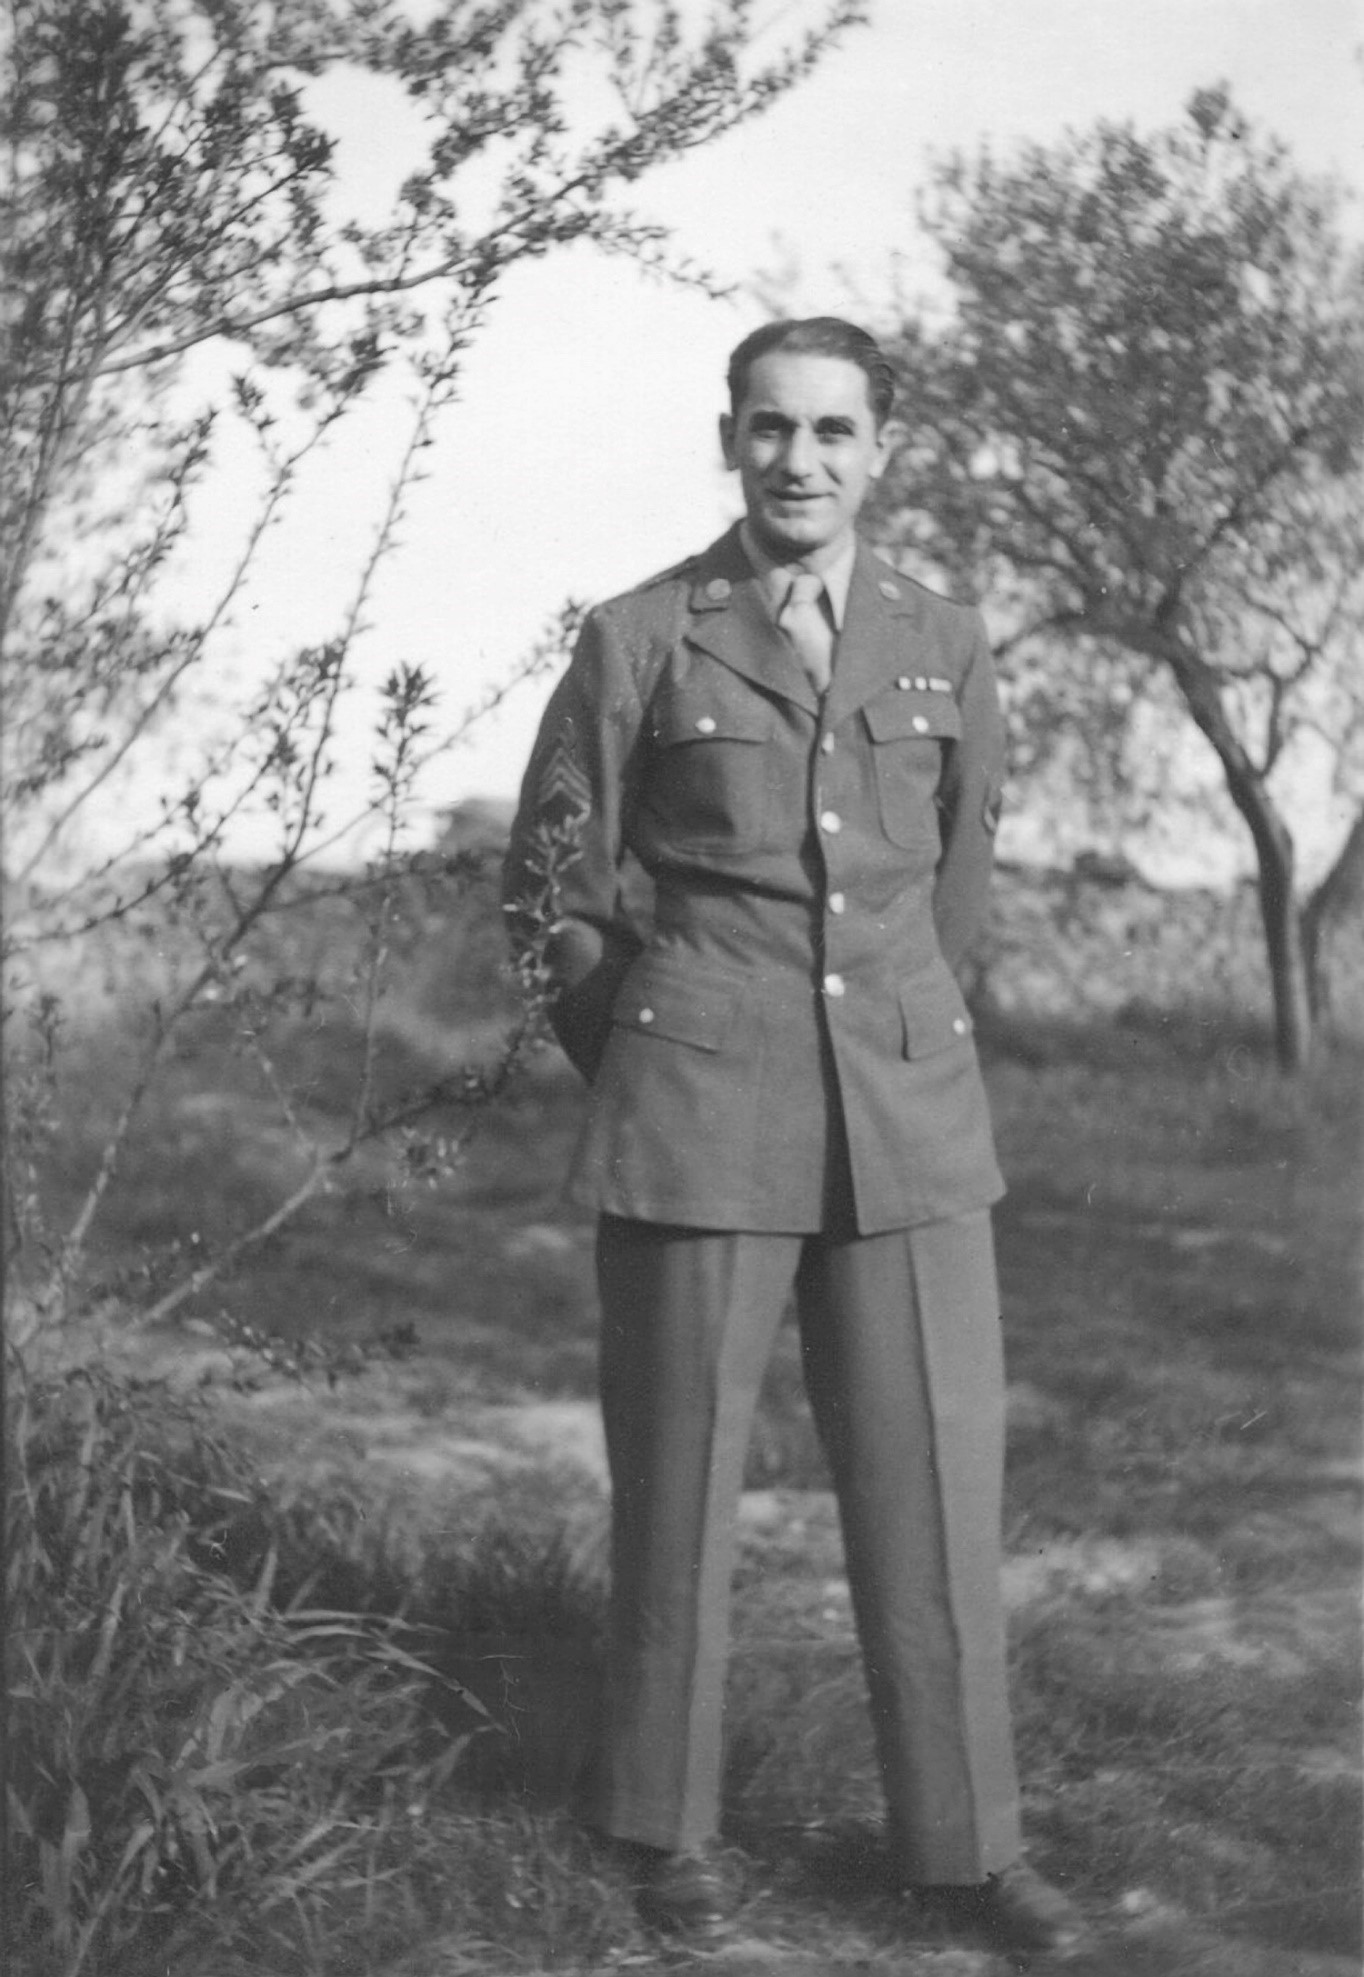 A photo taken of Dad while stationed in Foggia, Italy, 1944